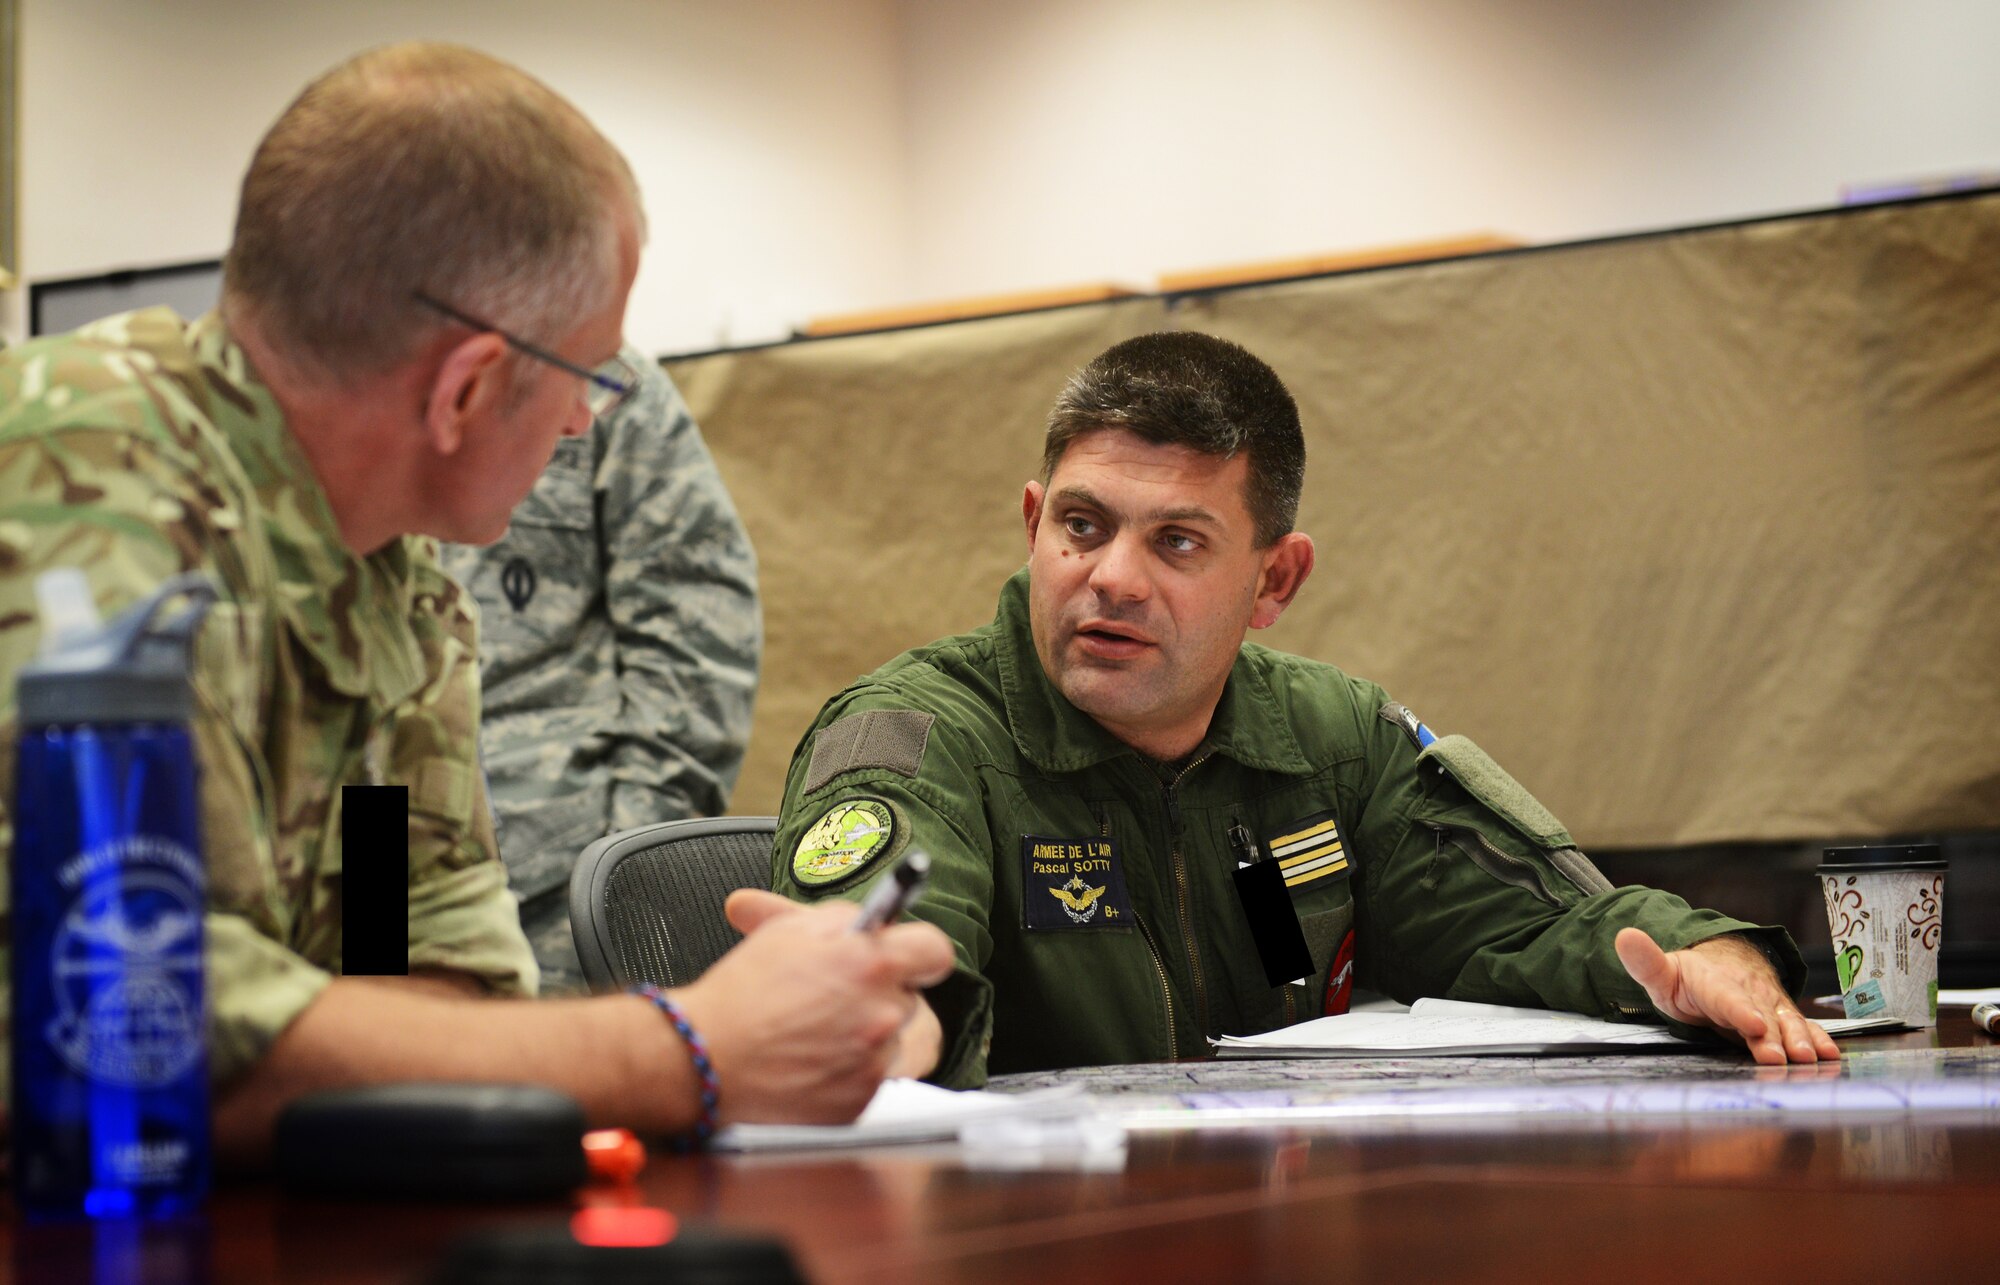 Squadron Leader Gordon Ferguson from the U.K. and LCL Pascal Sotty from France, plan the tri-lateral exercise, Tonnerre Lightning, with U.S. Air Force pilots and 603rd Air and Space Operations Center planning teams on March 27, 2014 at Ramstein Air Base, Germany. The exercise is the first in a series of semi-annual exercises between the NATO countries to improve interoperability and communication in the event of a real-world scenario. This first exercise was conducted off of the English coast and focused on strengthening communication between all agencies involved. (U.S. Air Force photo/Staff Sgt. Ryan Crane) 